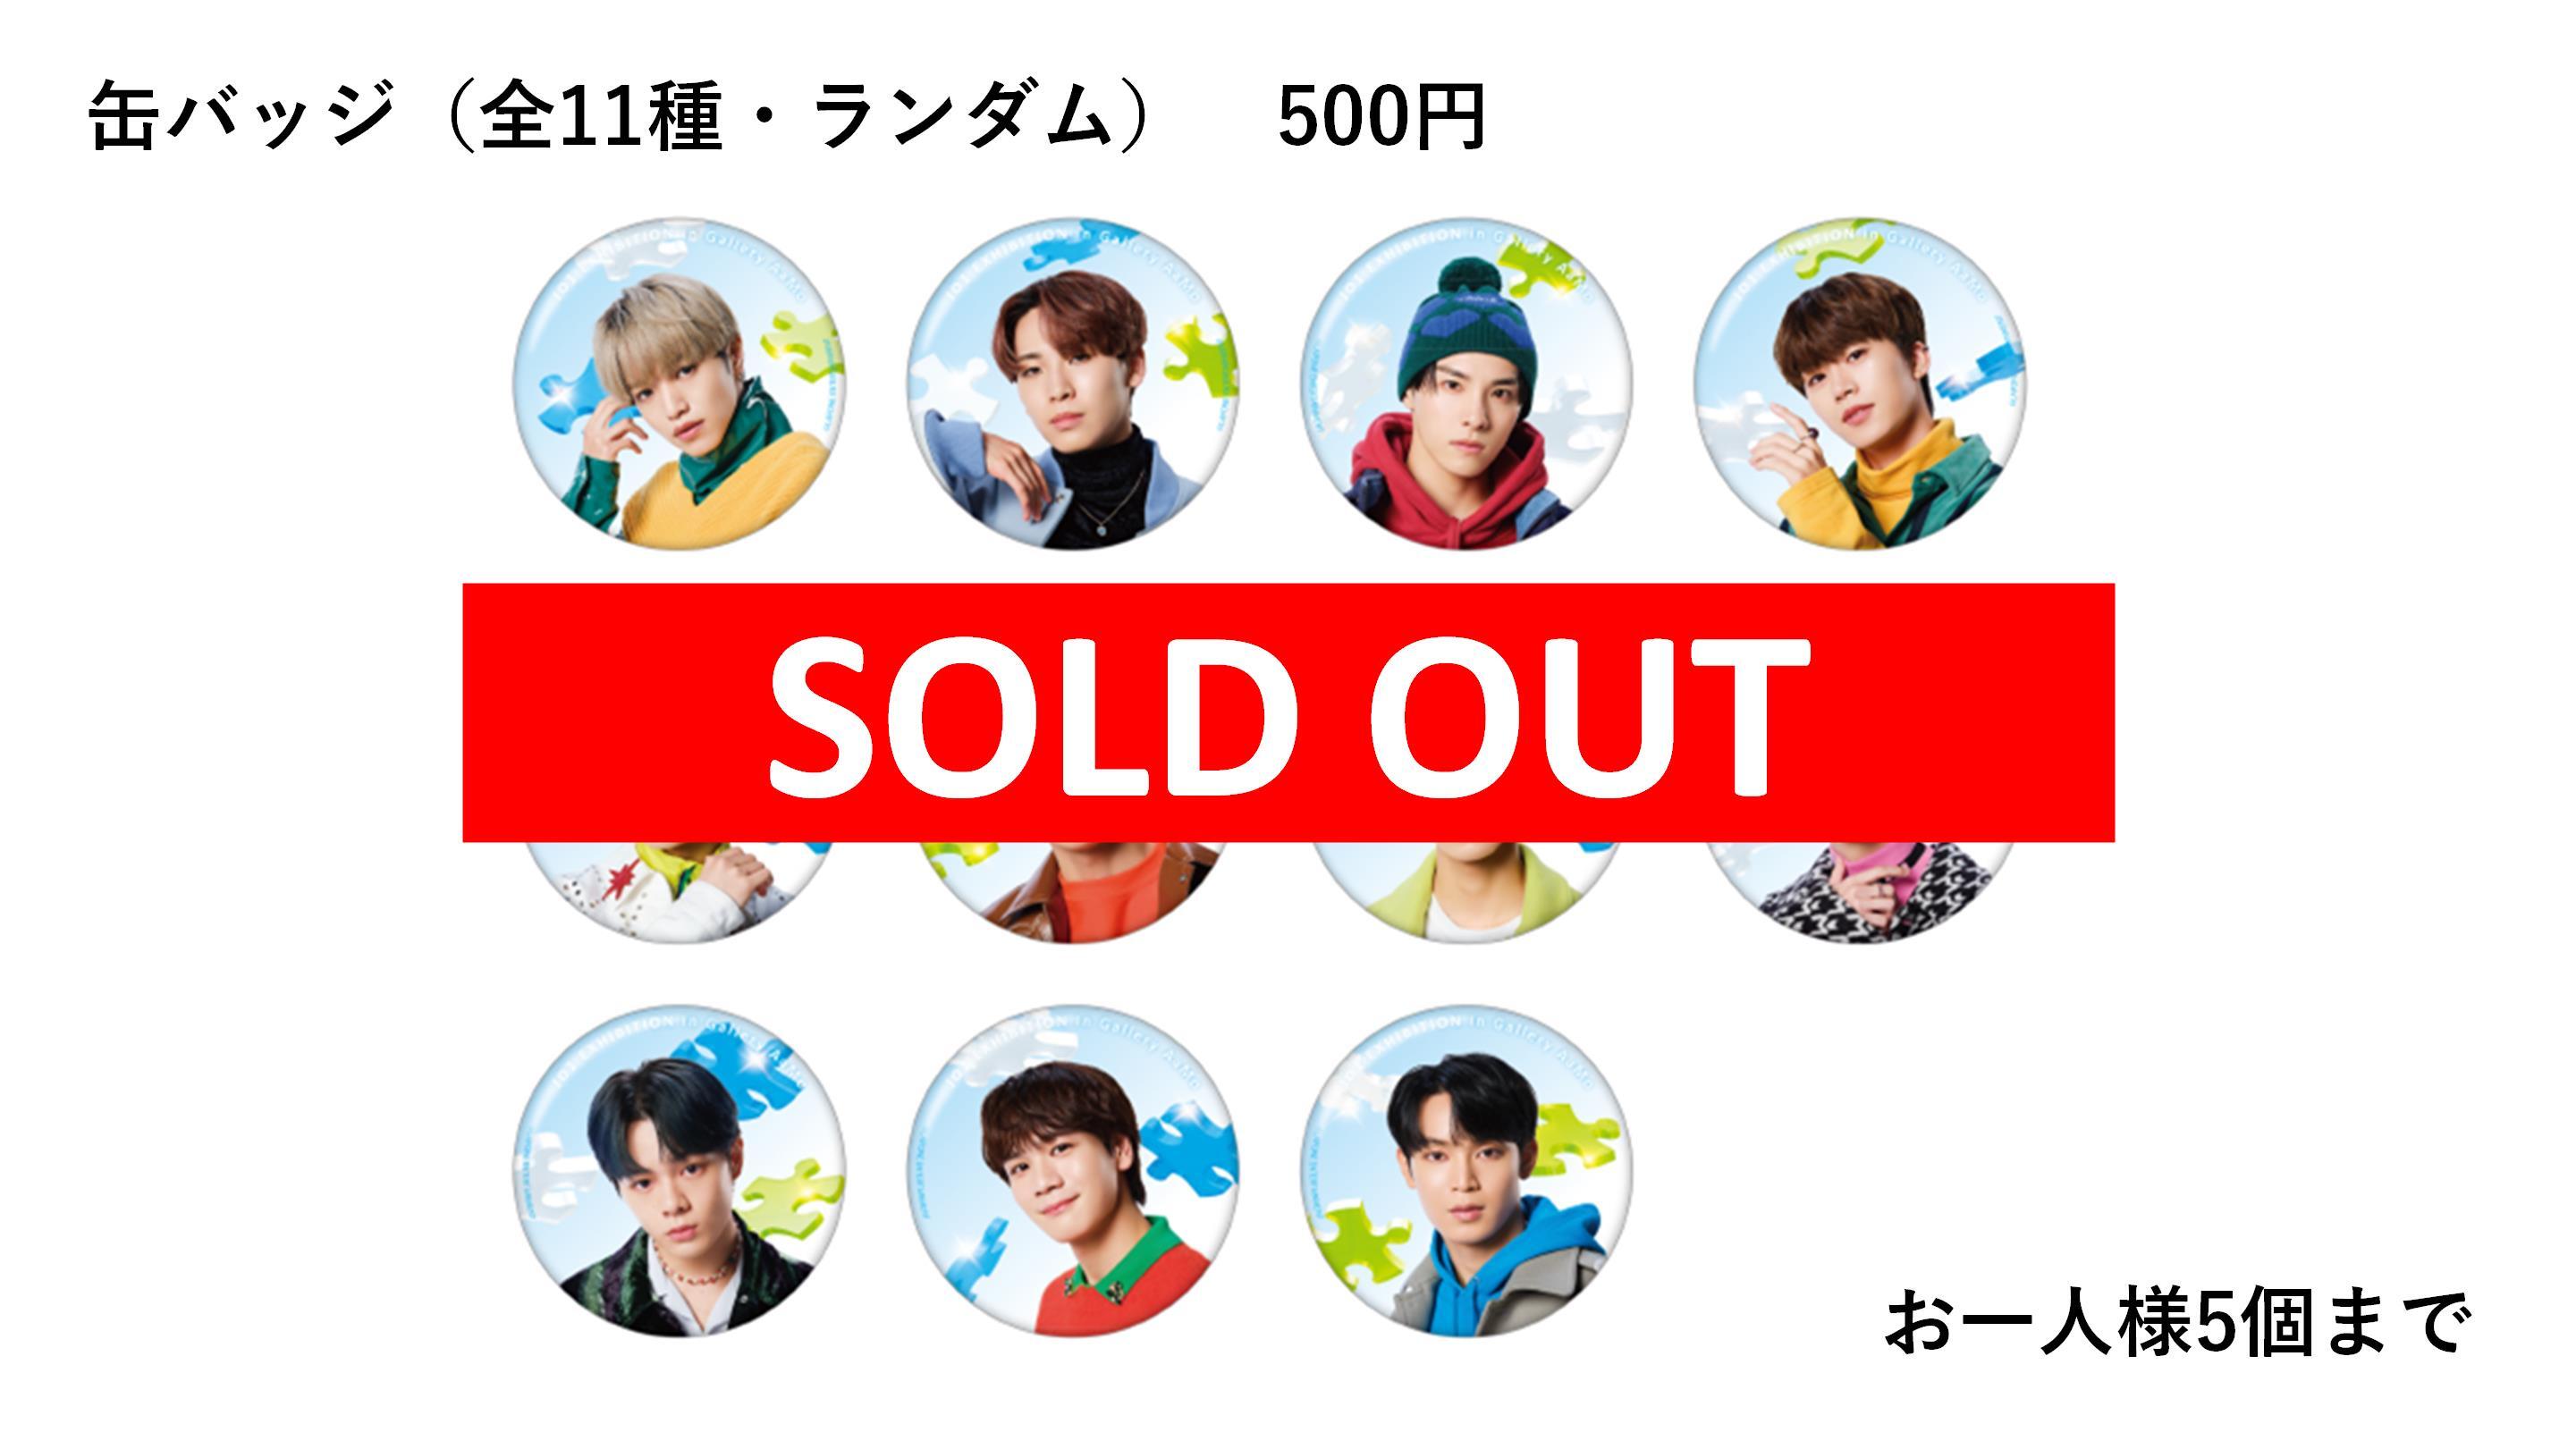 canbadge_soldout.jpg